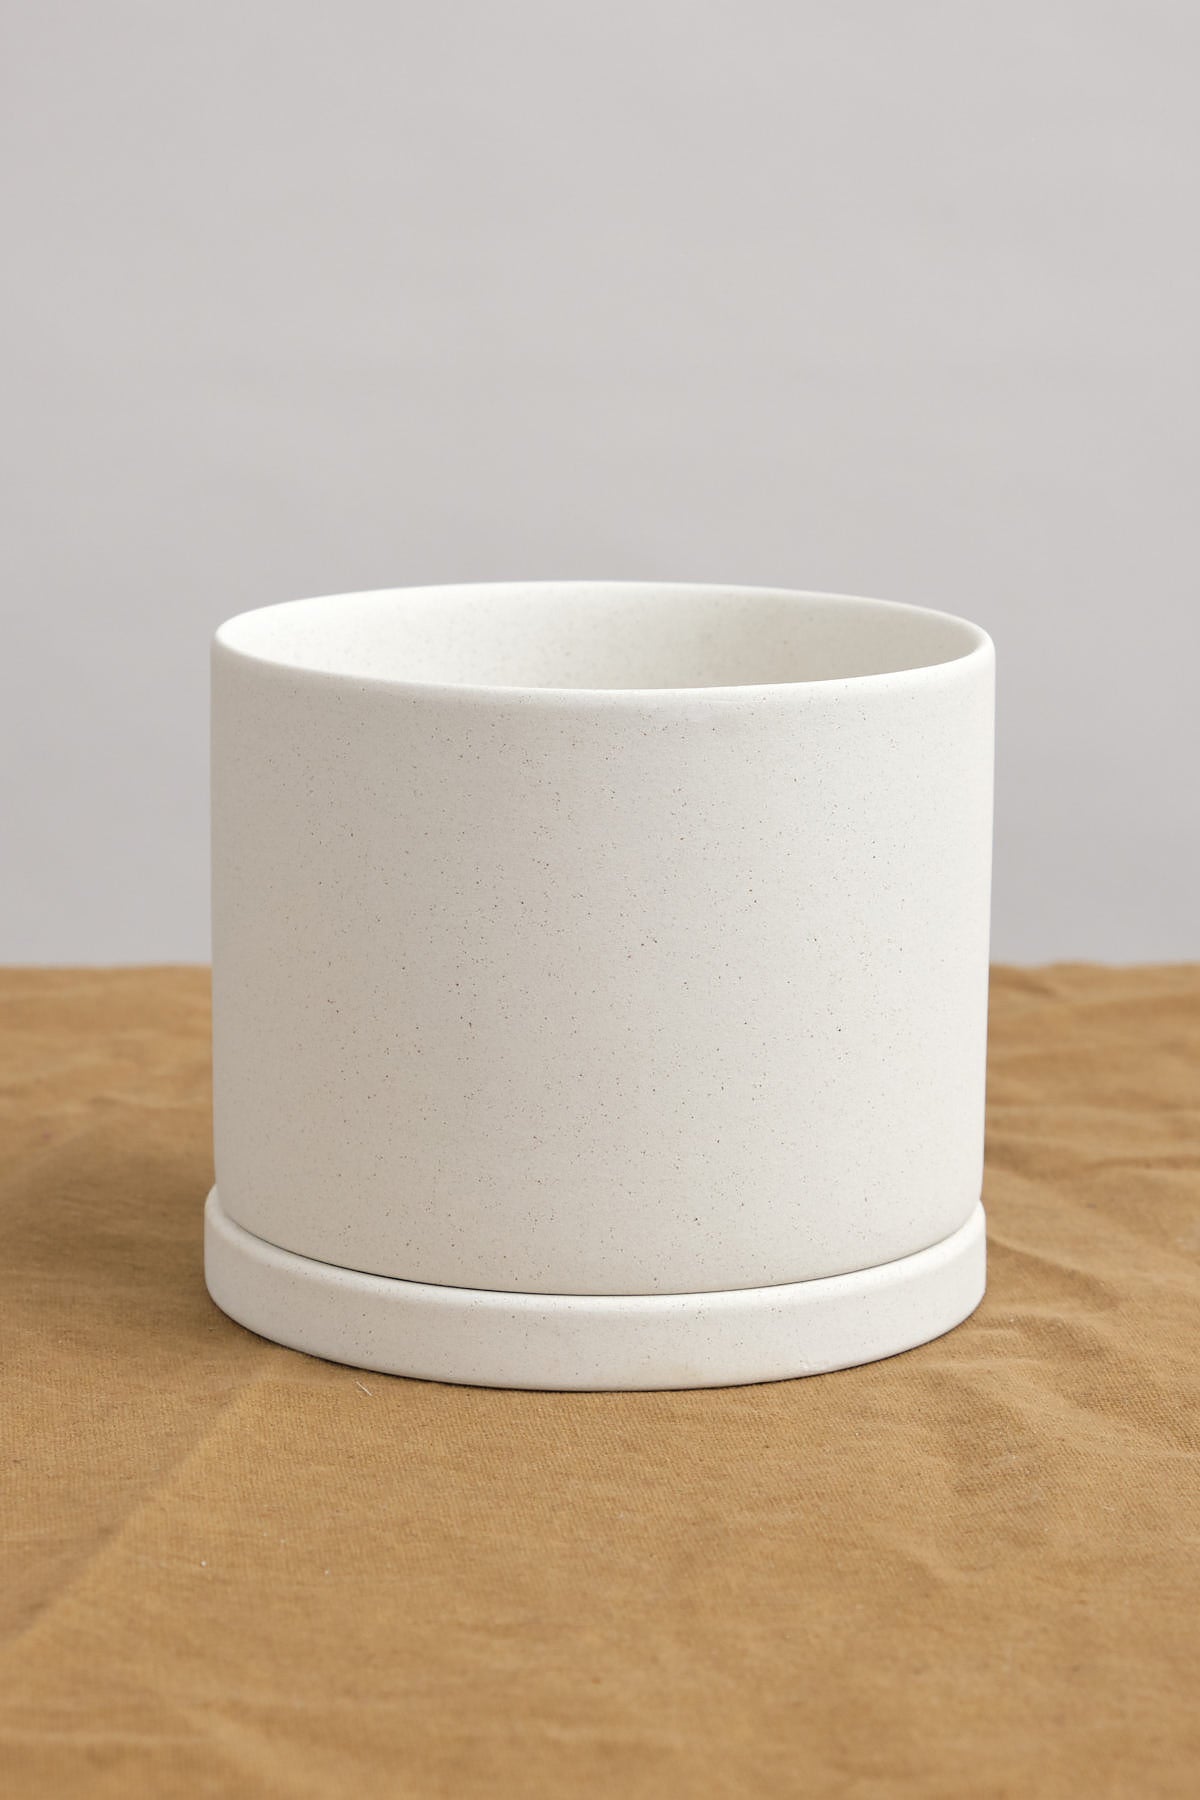 Kinto Japanese Porcelain Plant Pot in Earth Grey